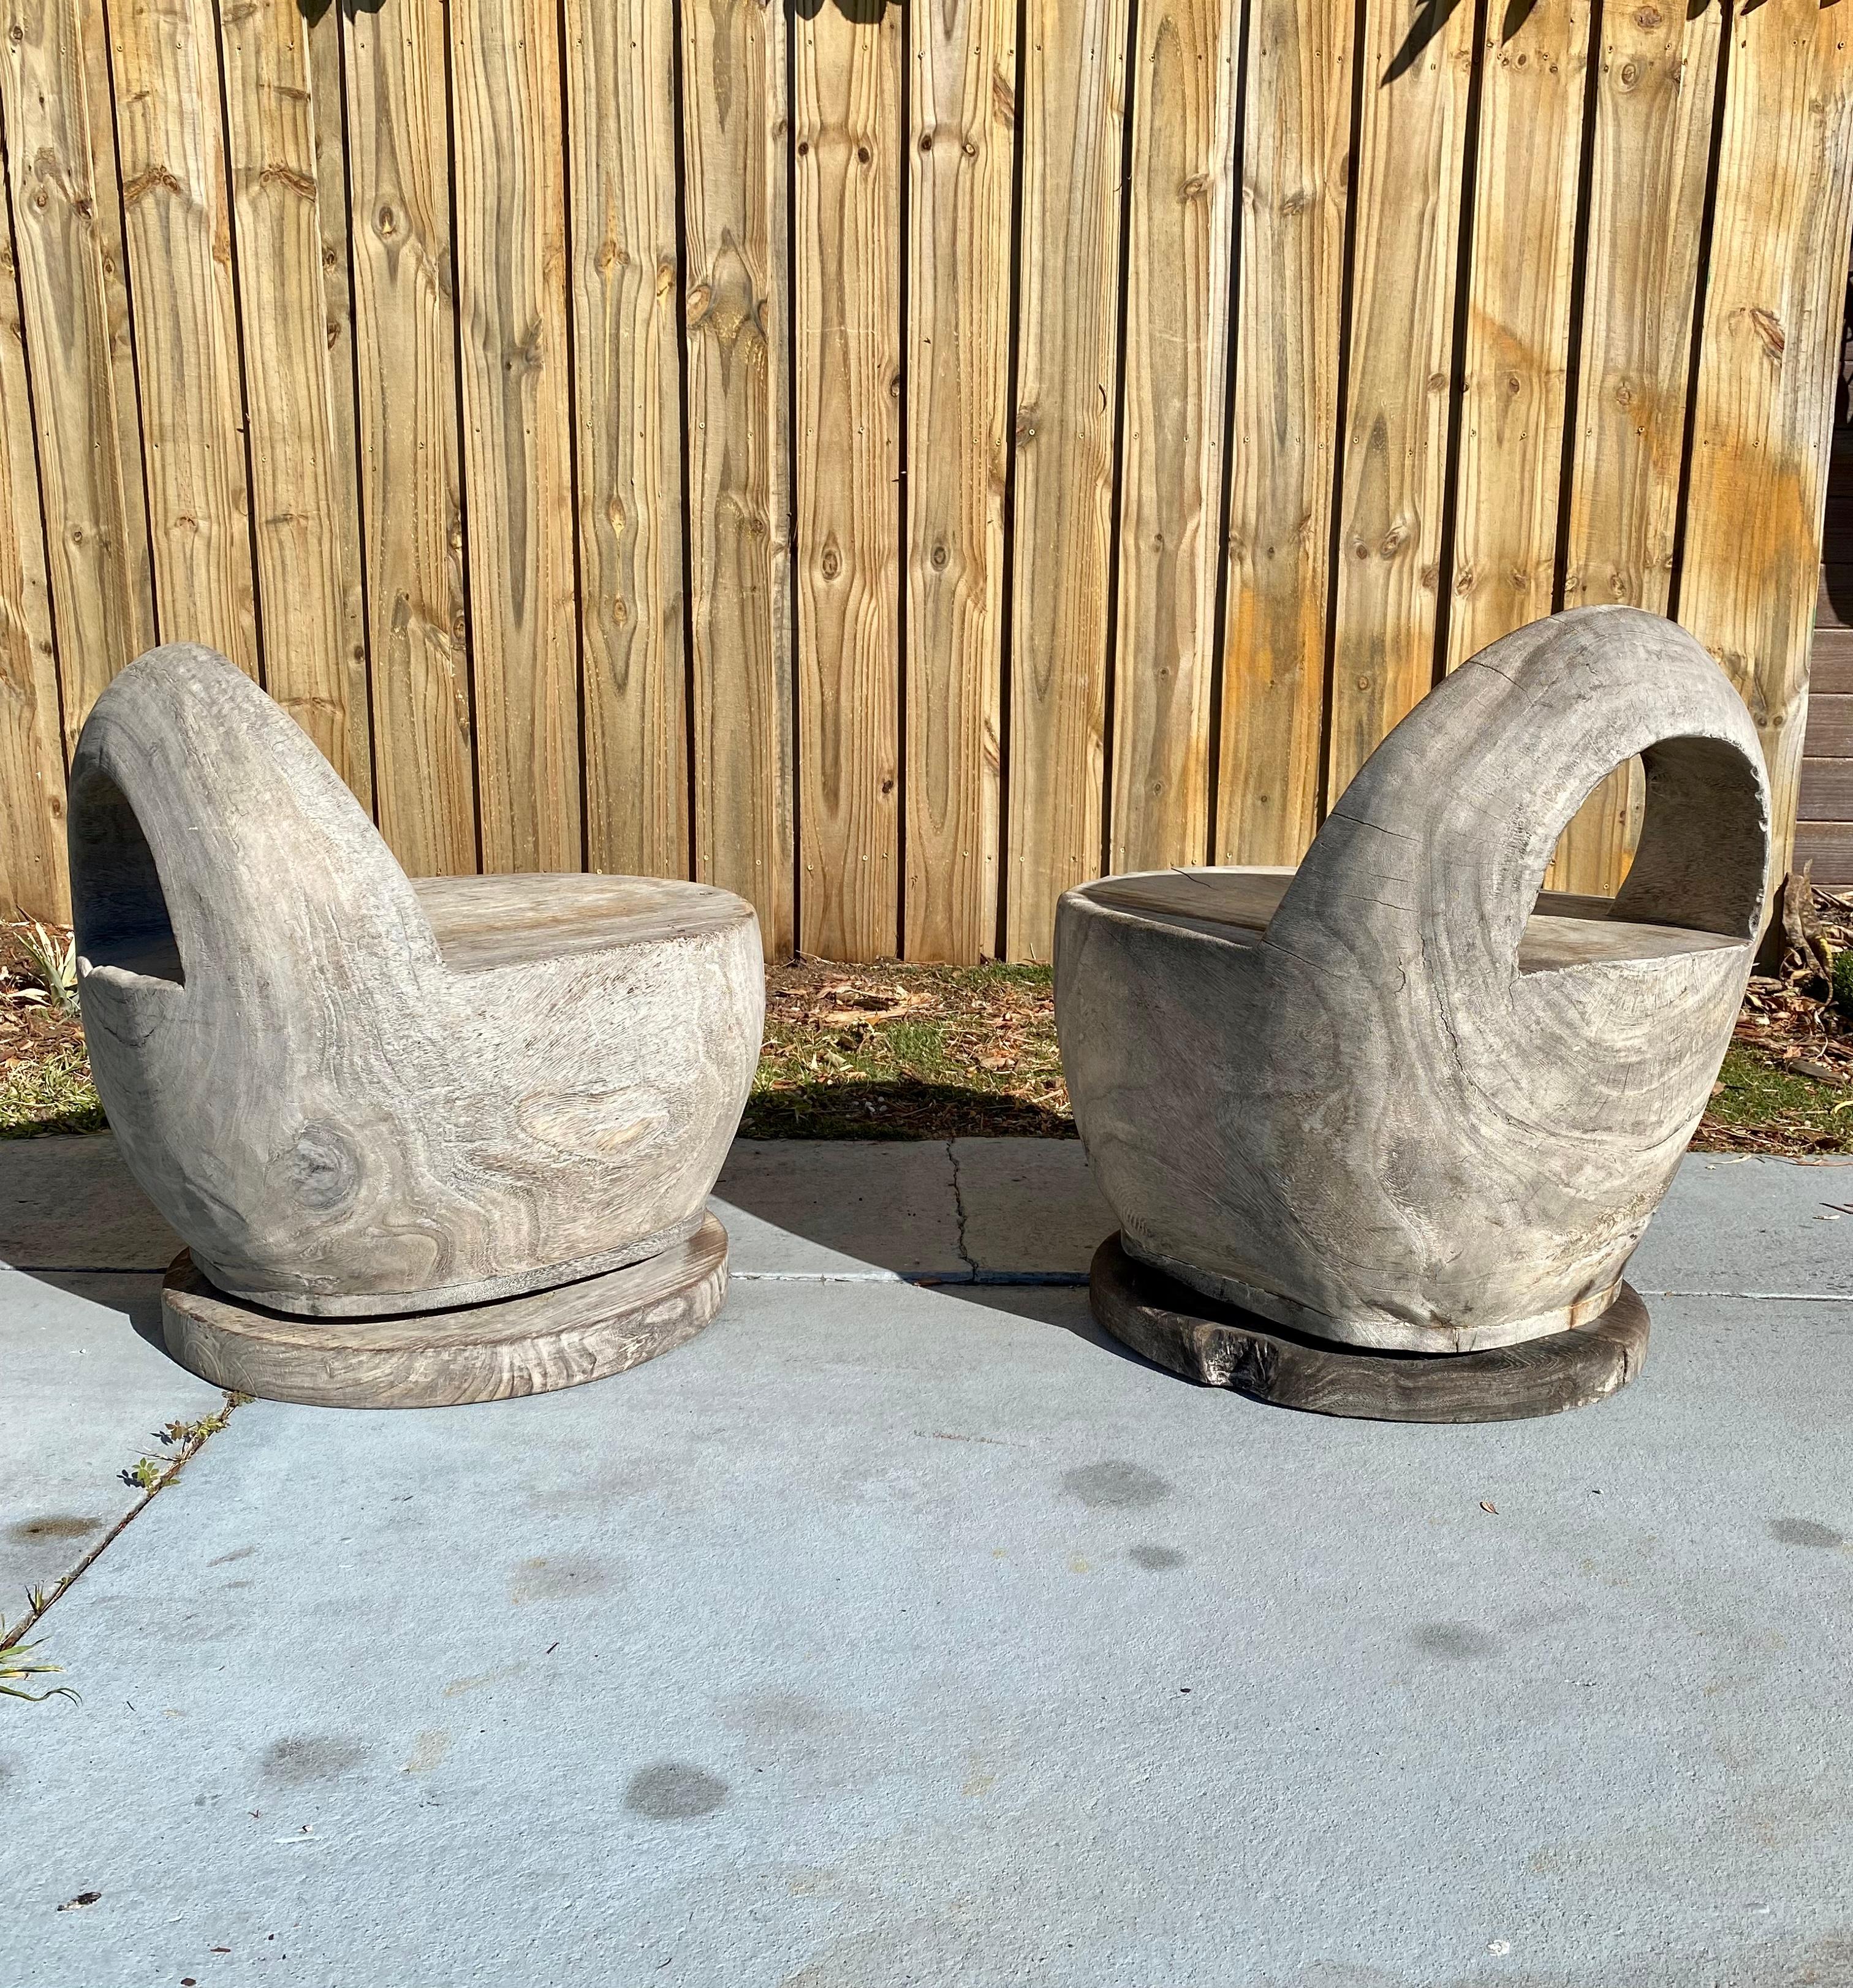 1950s Organic Wood Sculptural Cerused Oak Barrel Curved Swivel Chairs, Set of 2 In Good Condition For Sale In Fort Lauderdale, FL